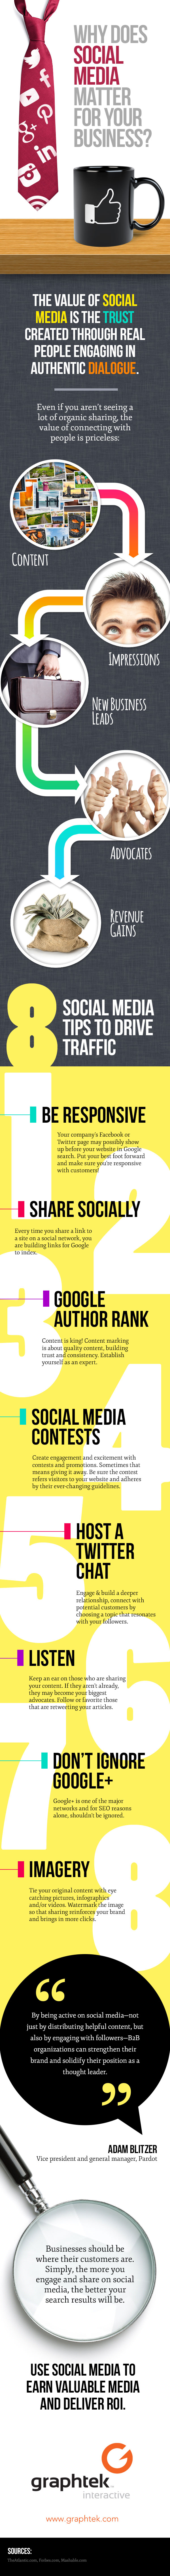 infographic___social_media_for_business